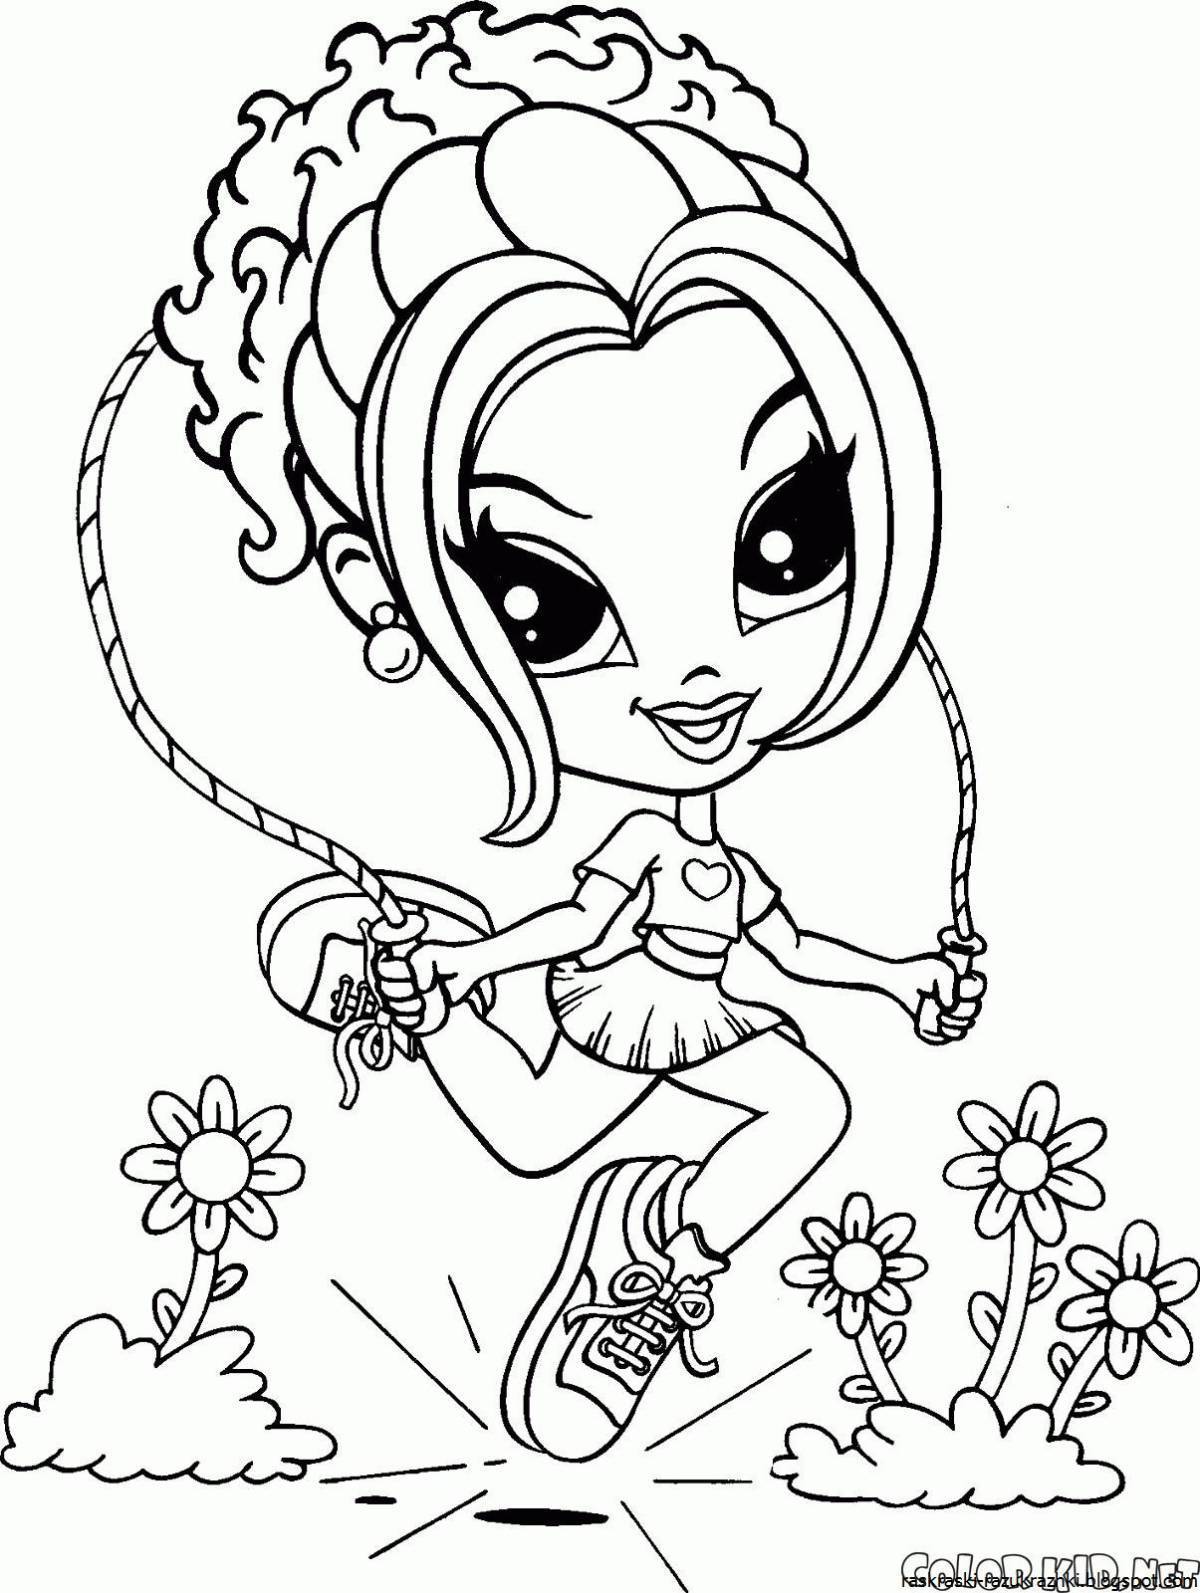 Creative coloring pages for girls